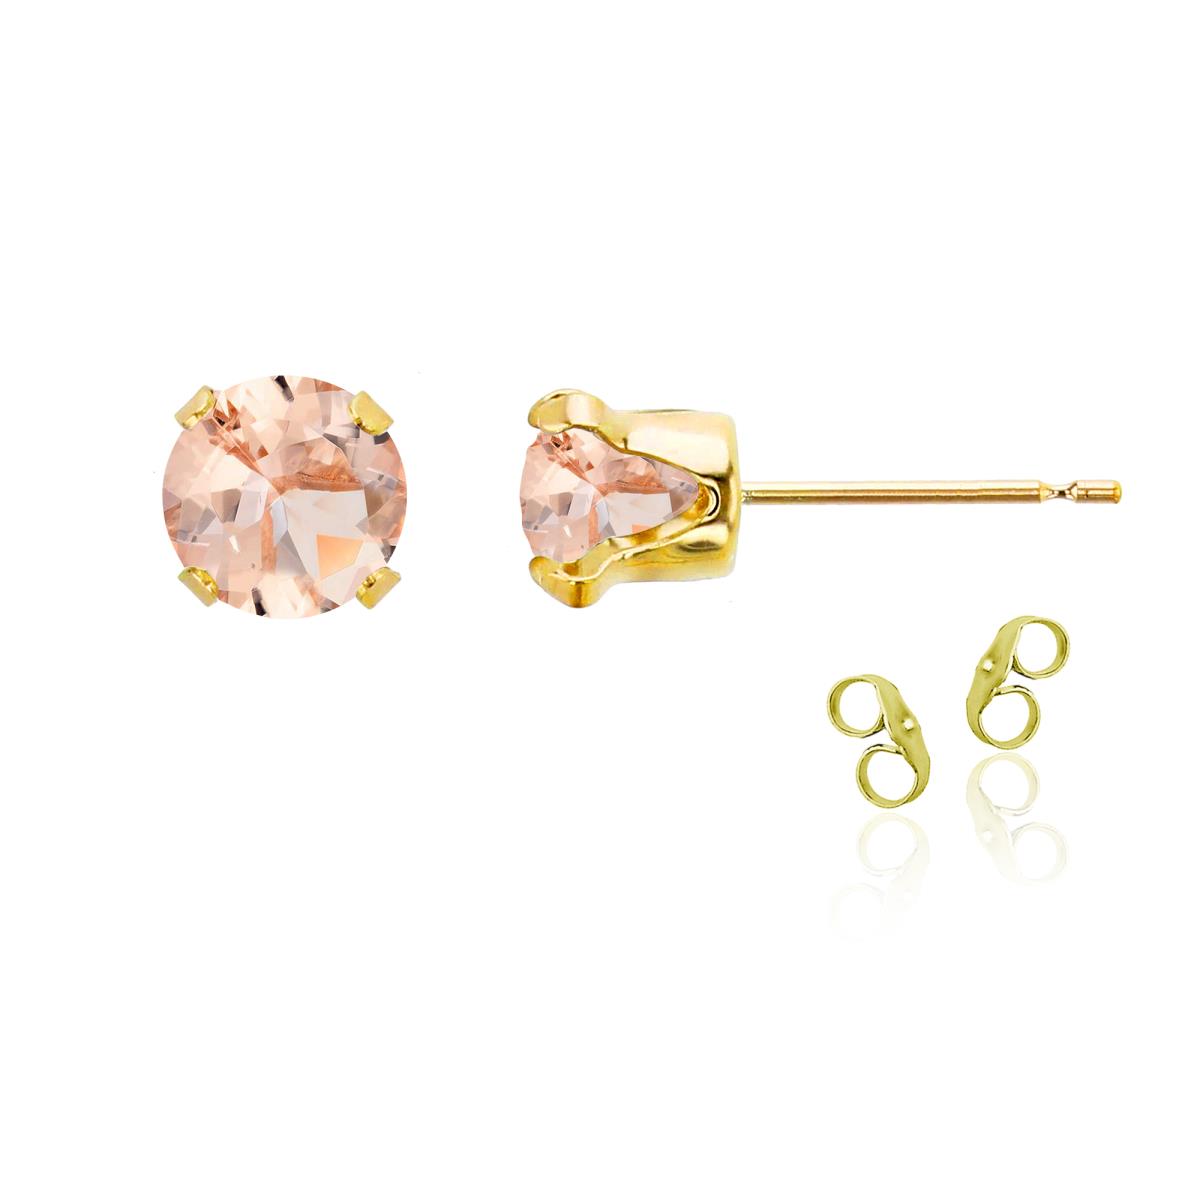 Sterling Silver Yellow 6mm Round Morganite Stud Earring with Clutch